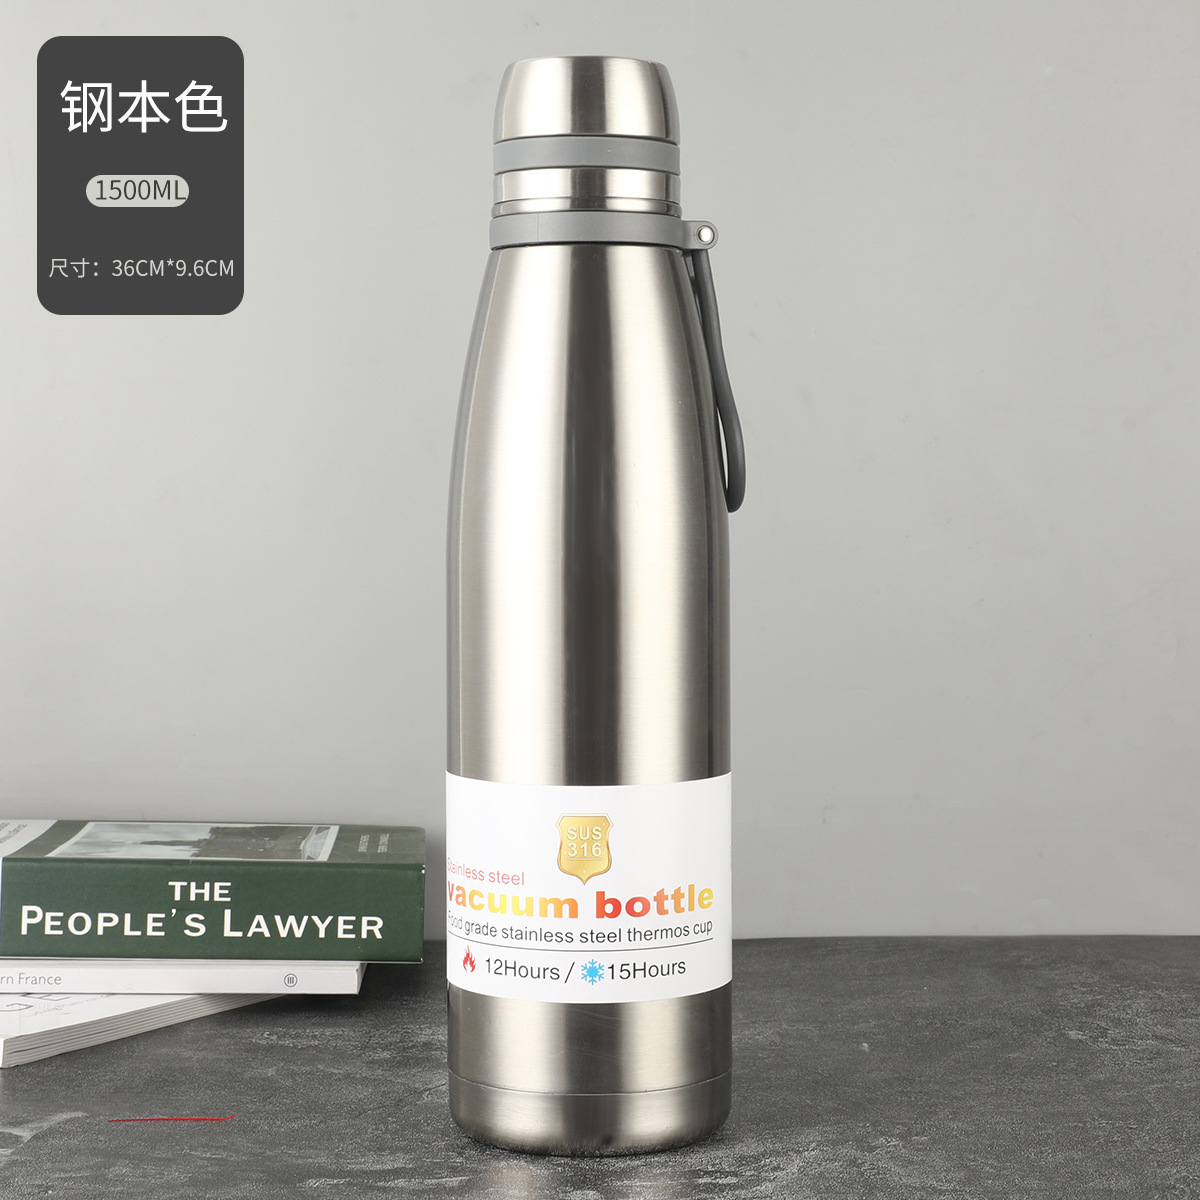 Exclusive for Cross-Border New 316 Stainless Steel Thermos Cup All Steel Large Capacity Outdoor Sports Bottle Coke Bottle Wholesale